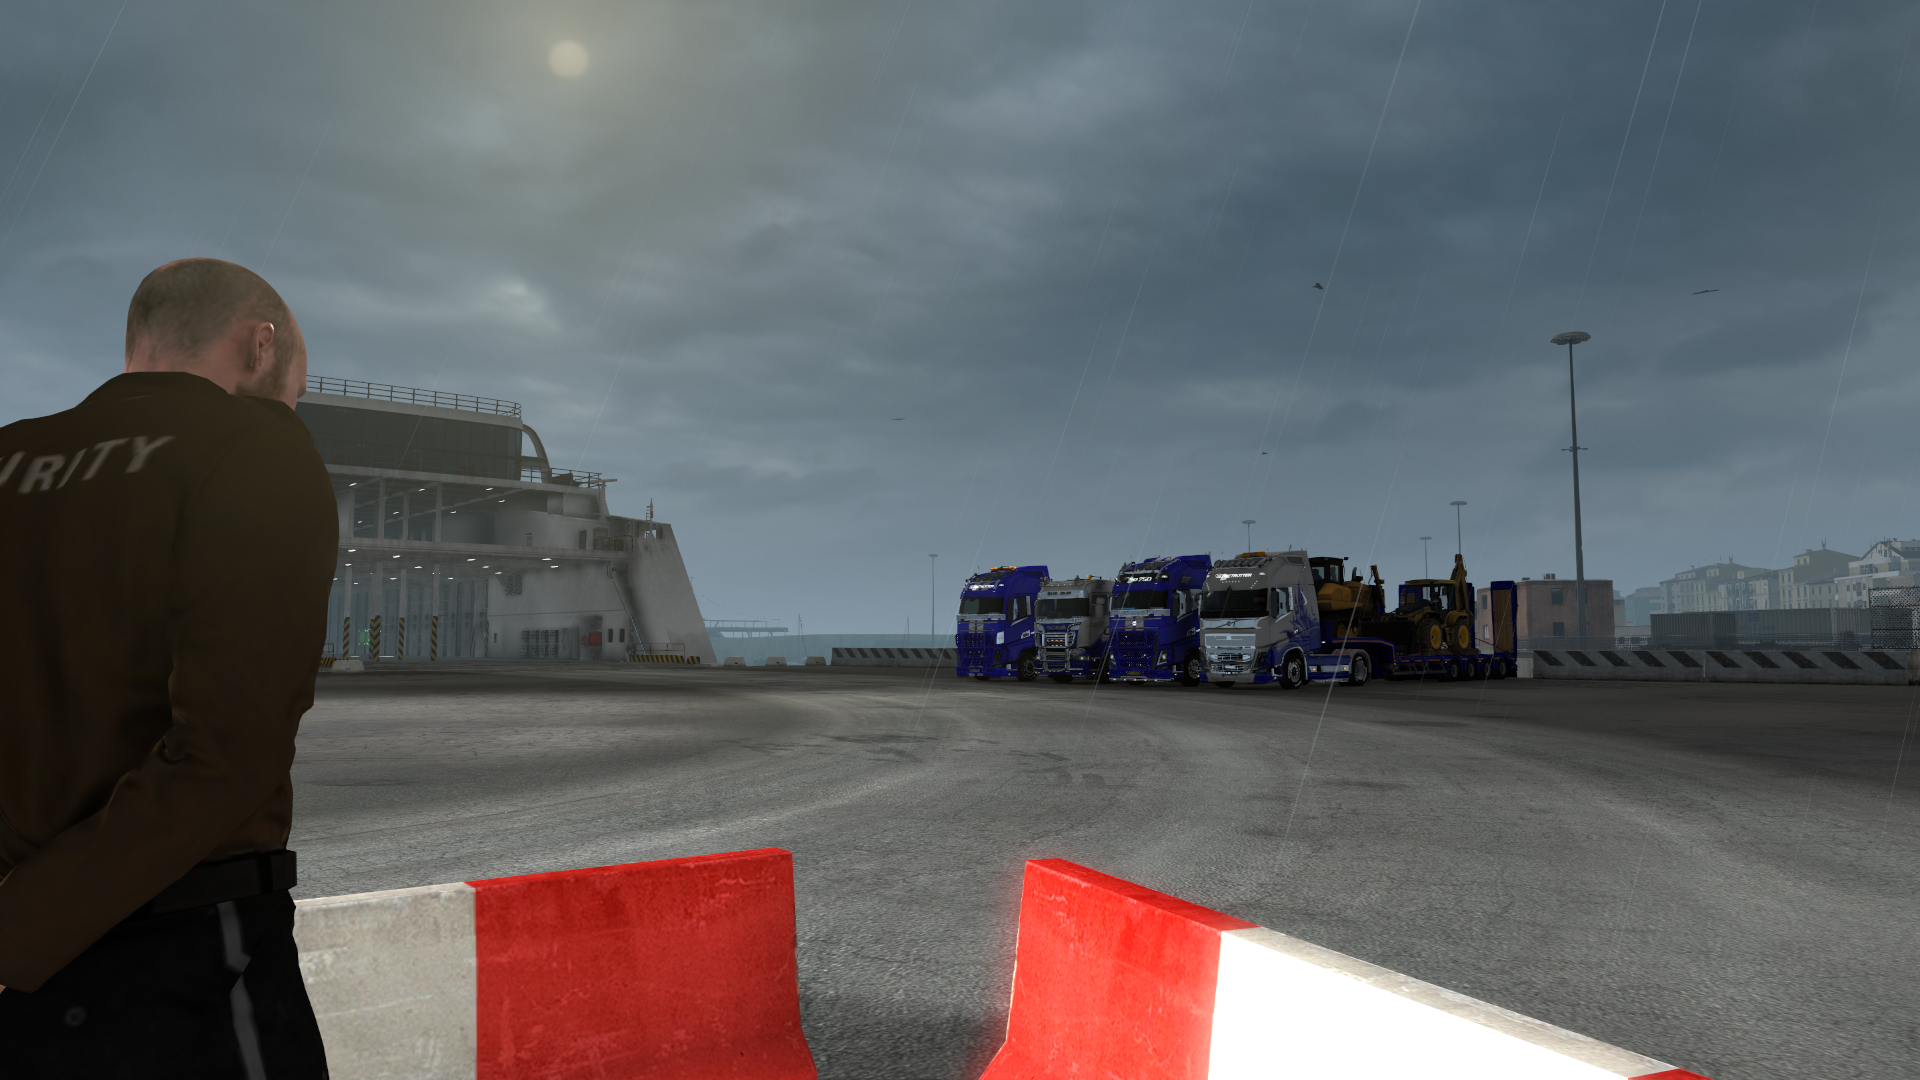 ets2_20210402_230621_00.png